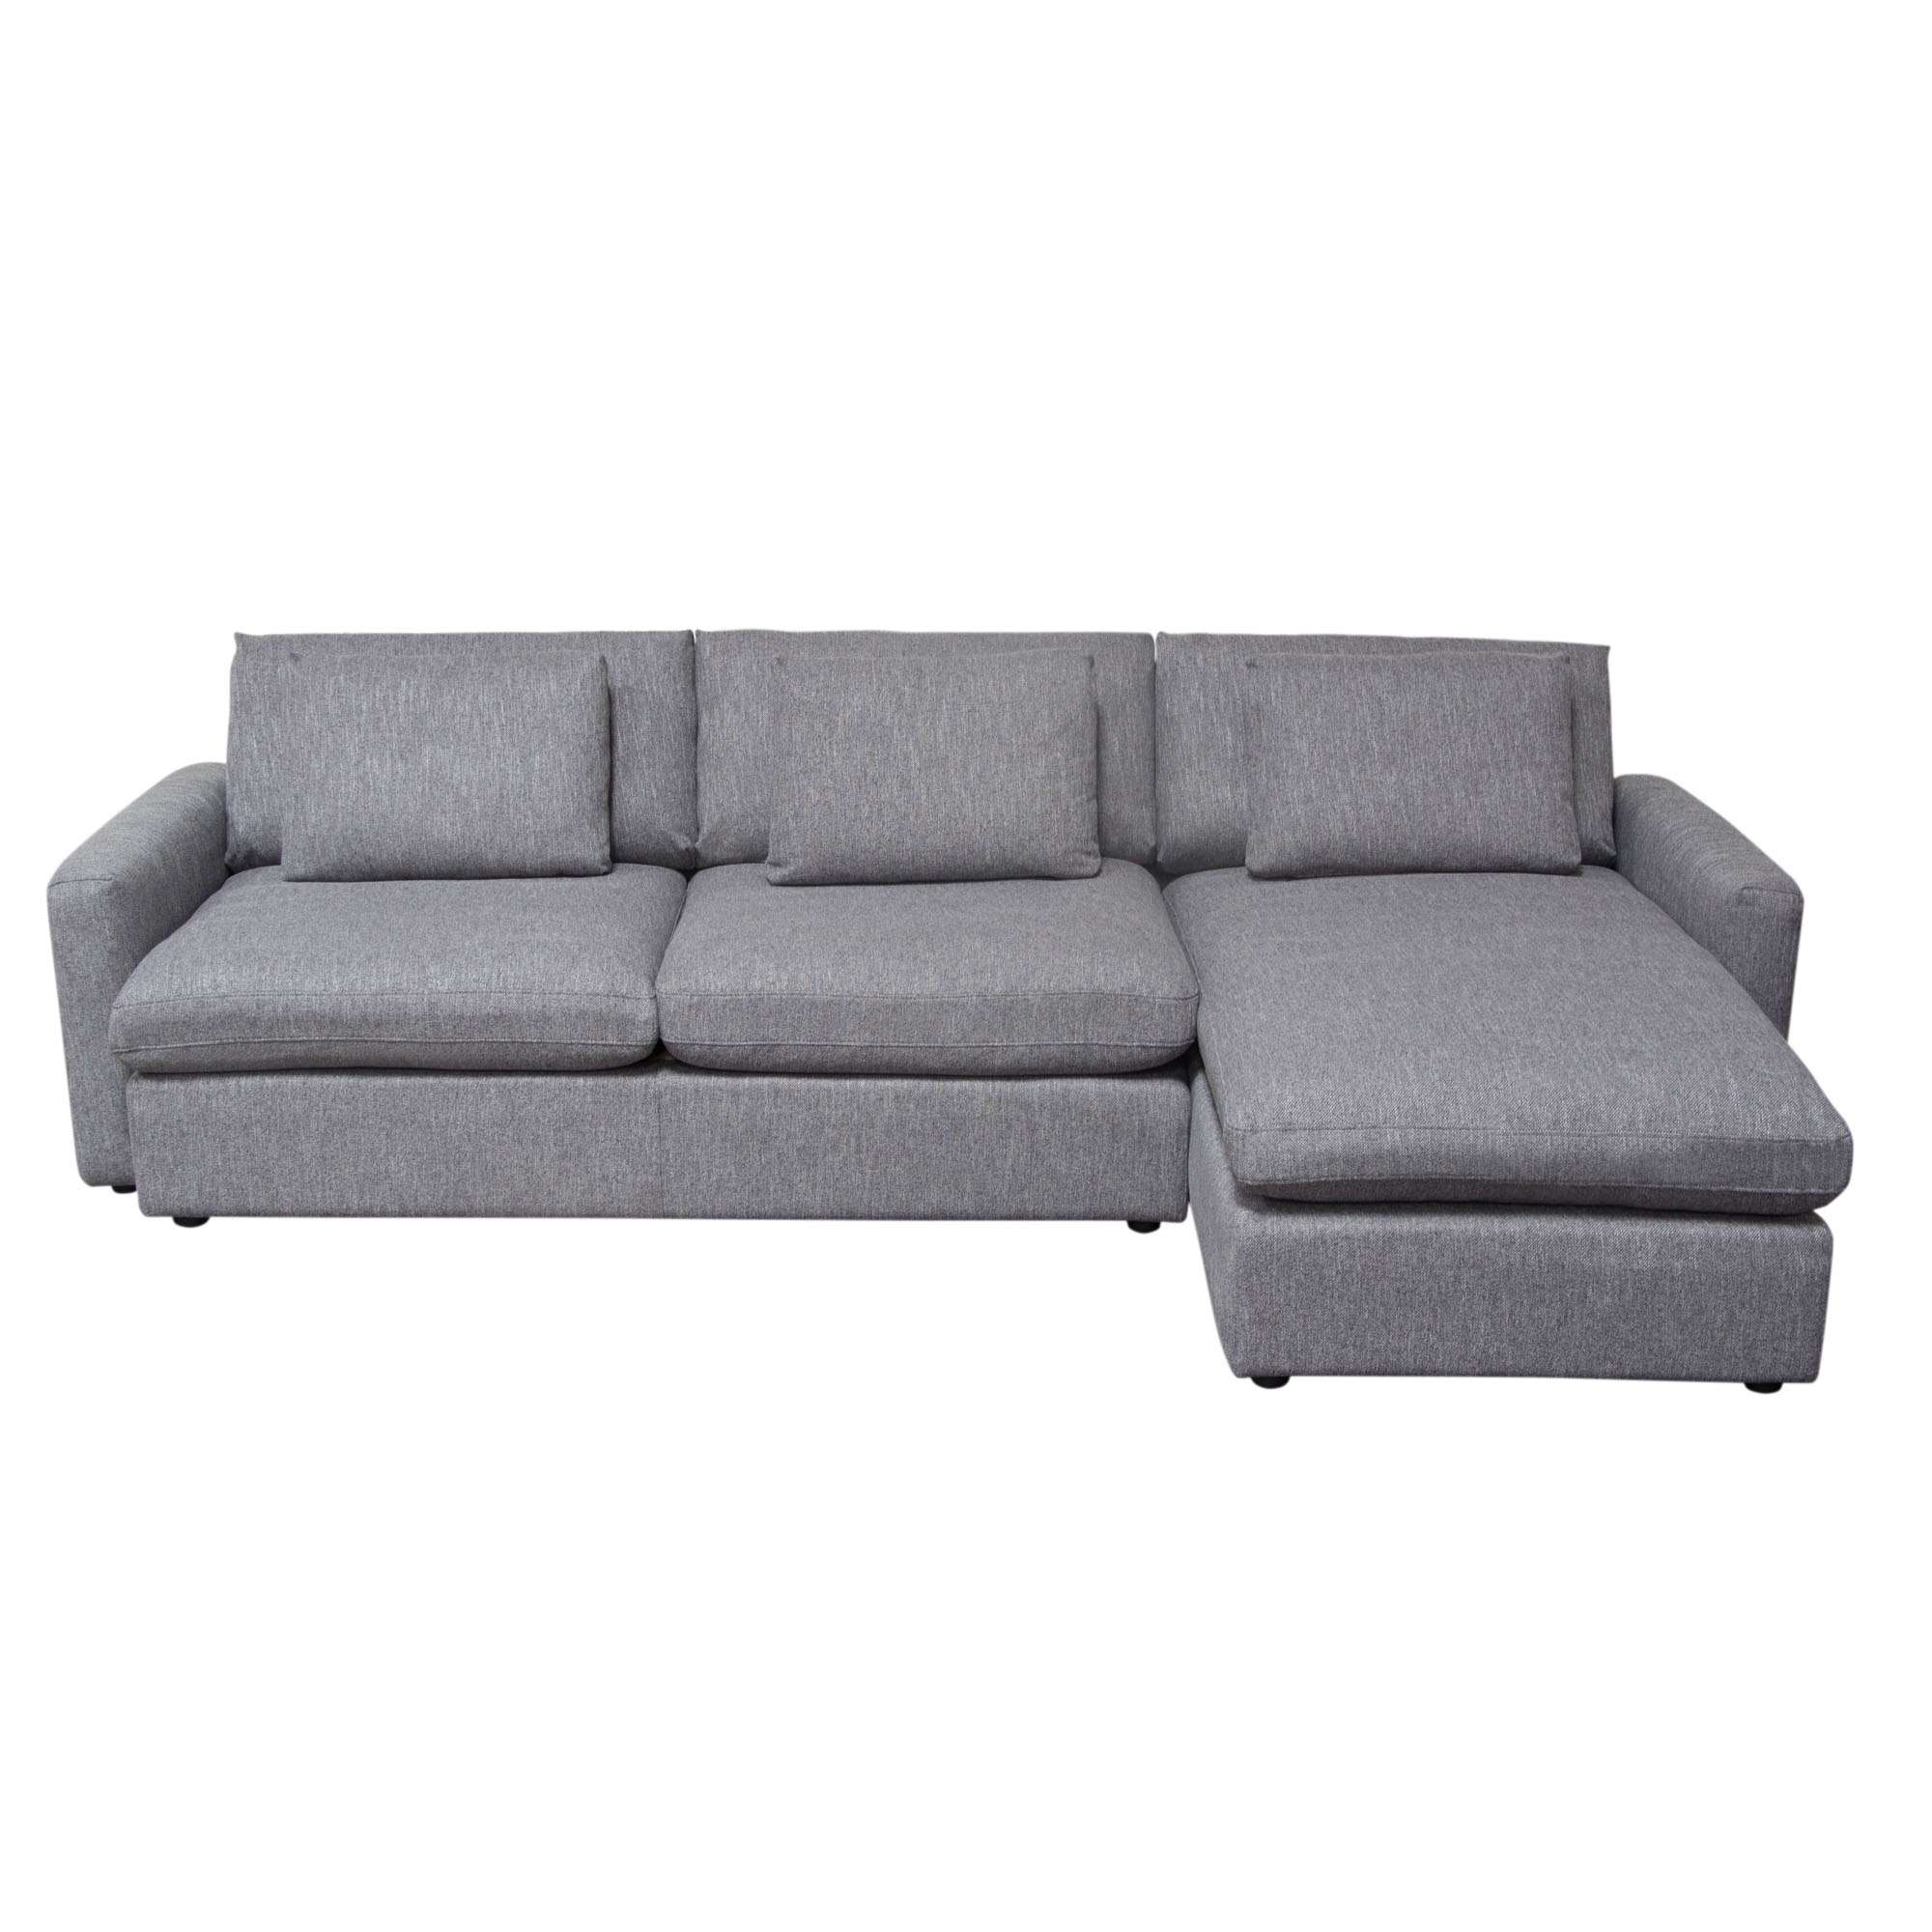 Arcadia 2PC Reversible Chaise Sectional w/ Feather Down Seating in Grey Fabric by Diamond Sofa - Decorian Group